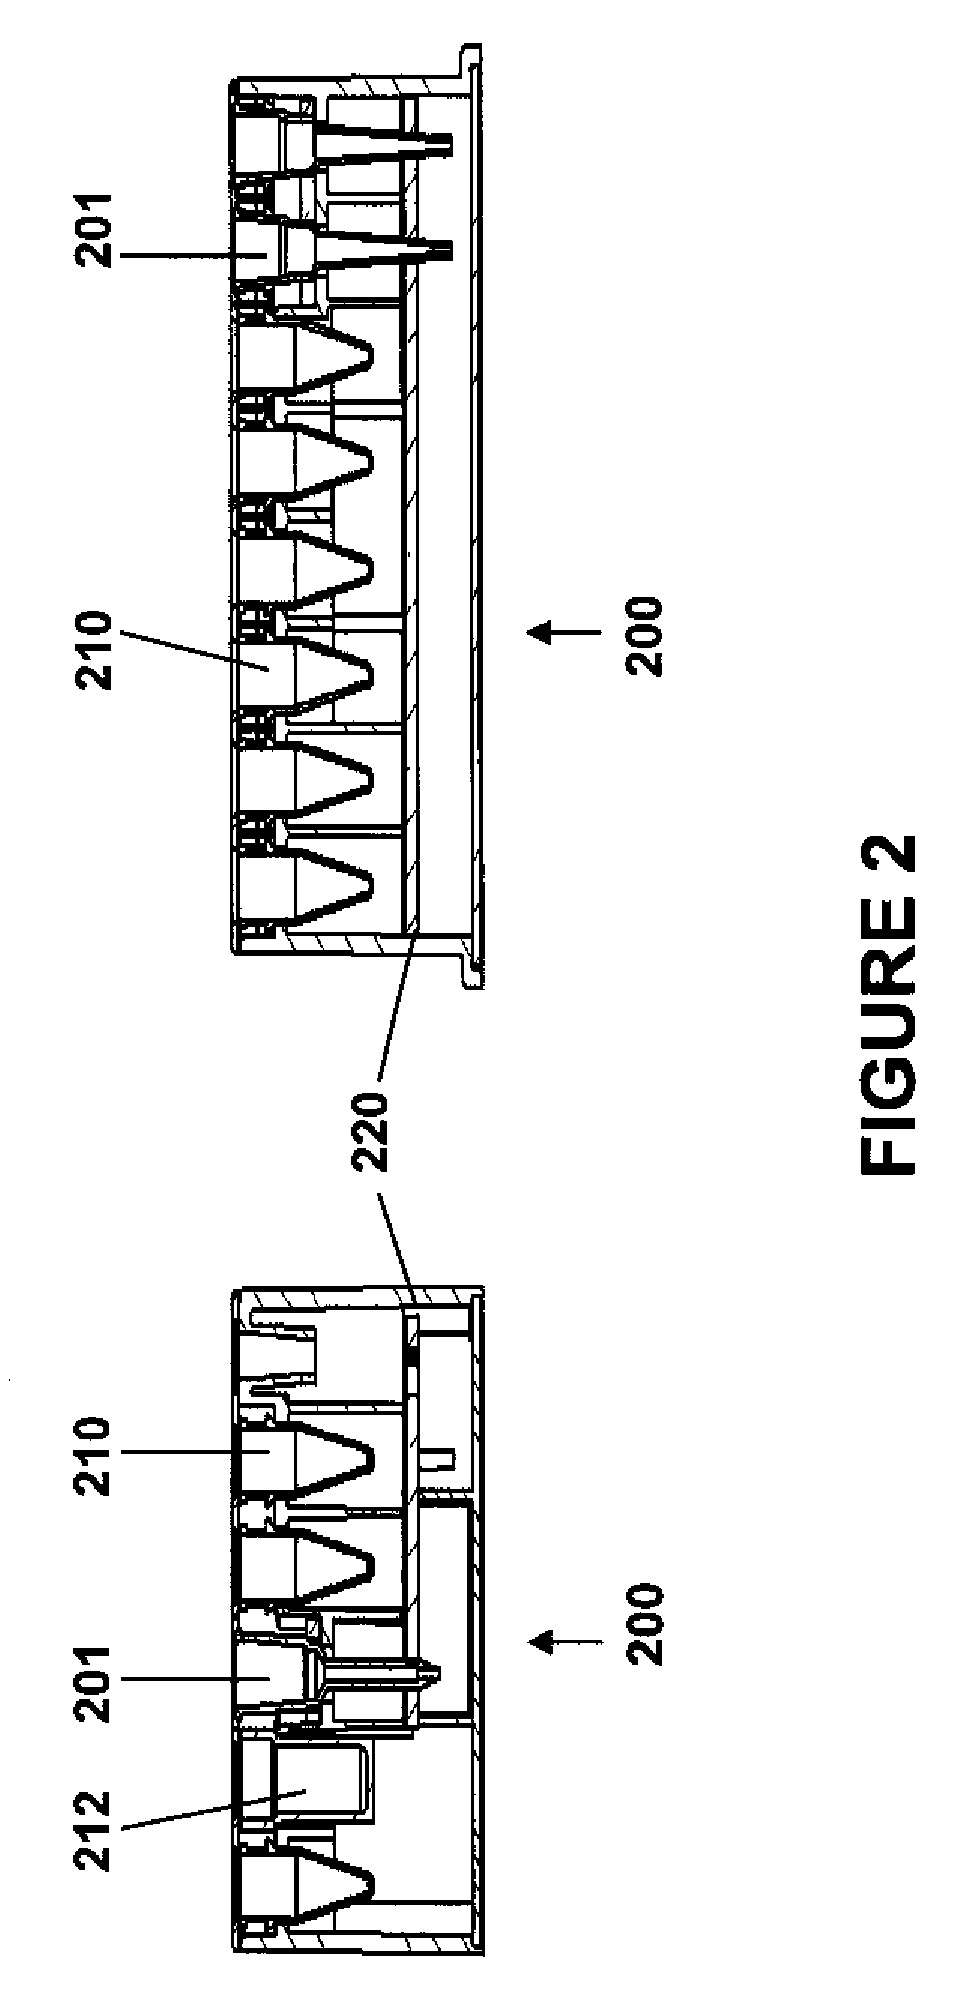 Modular point-of-care devices, systems, and uses thereof